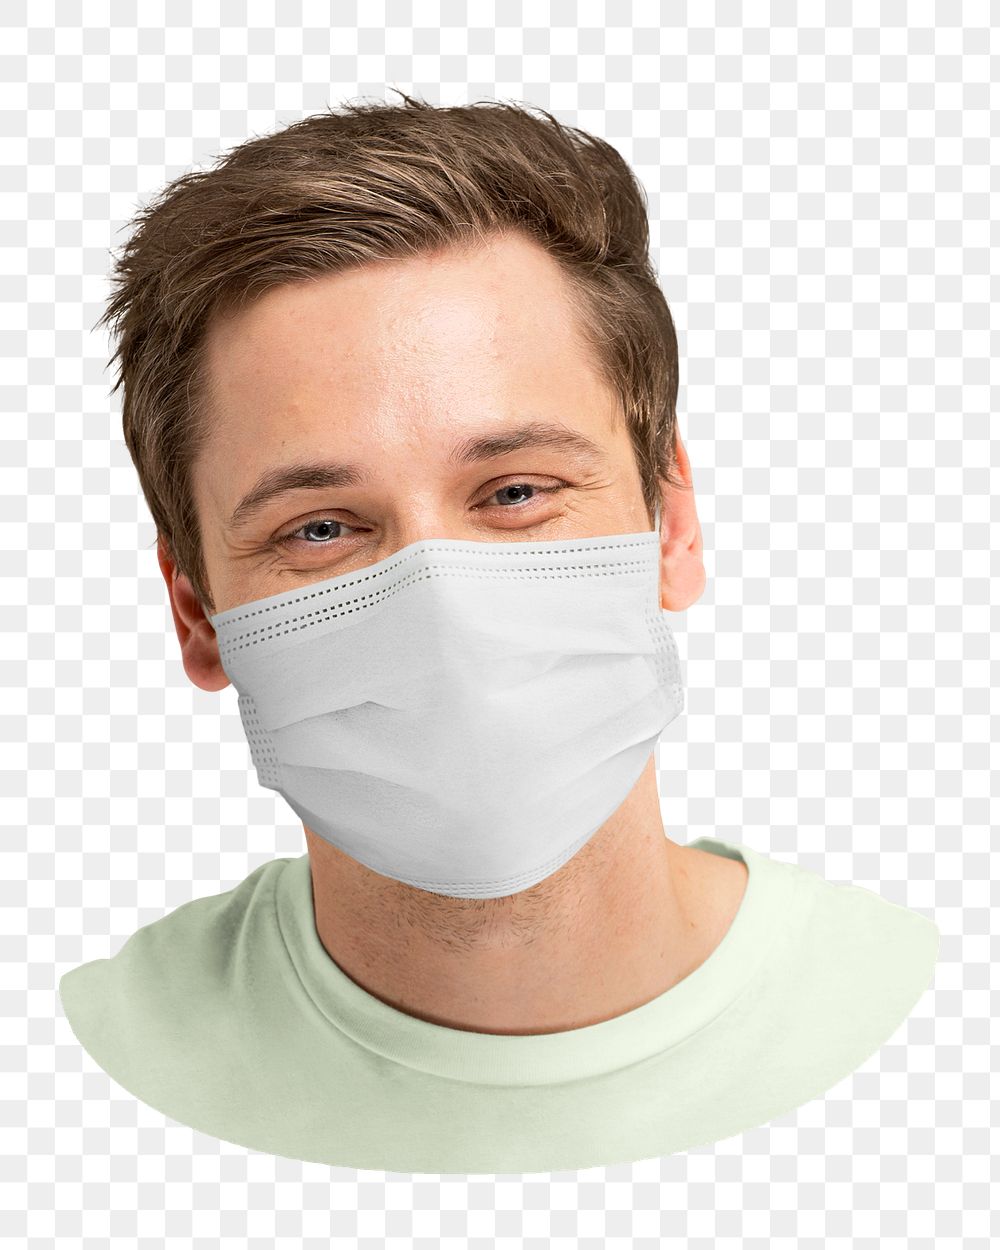 Happy man png wearing mask, transparent background